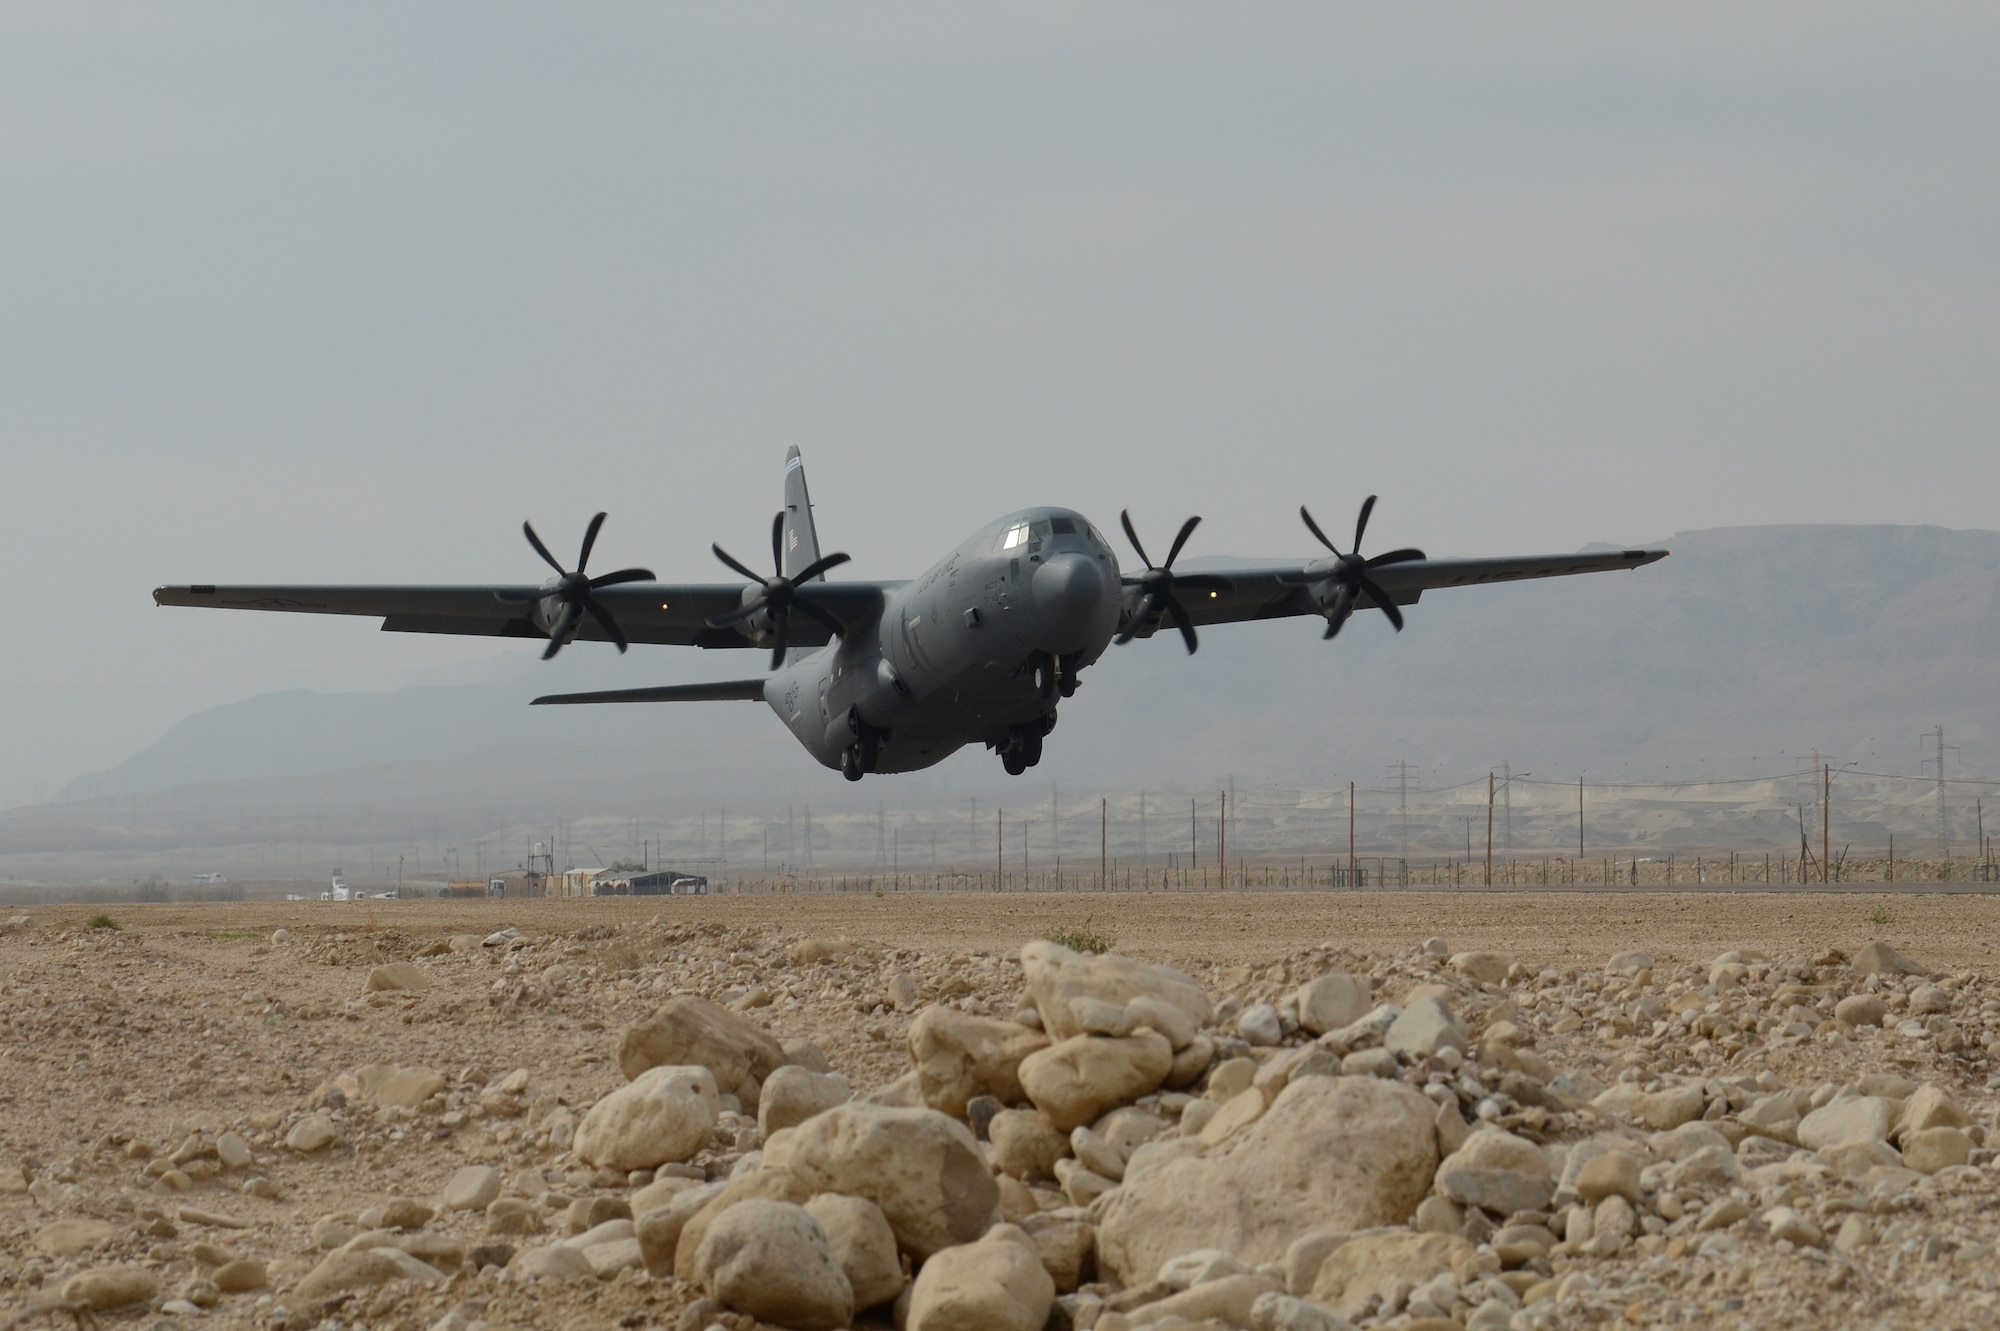 A C-130J Hercules takes off from a civilian airfield in Masada, Israel, Feb. 5, 2013. The 86th Airlift Wing conducted a flying training deployment with the Israeli Air Force in order to strengthen partnerships and maintain readiness for contingency operations. (U.S. Air Force photo / 2nd Lt. Kay M. Nissen)